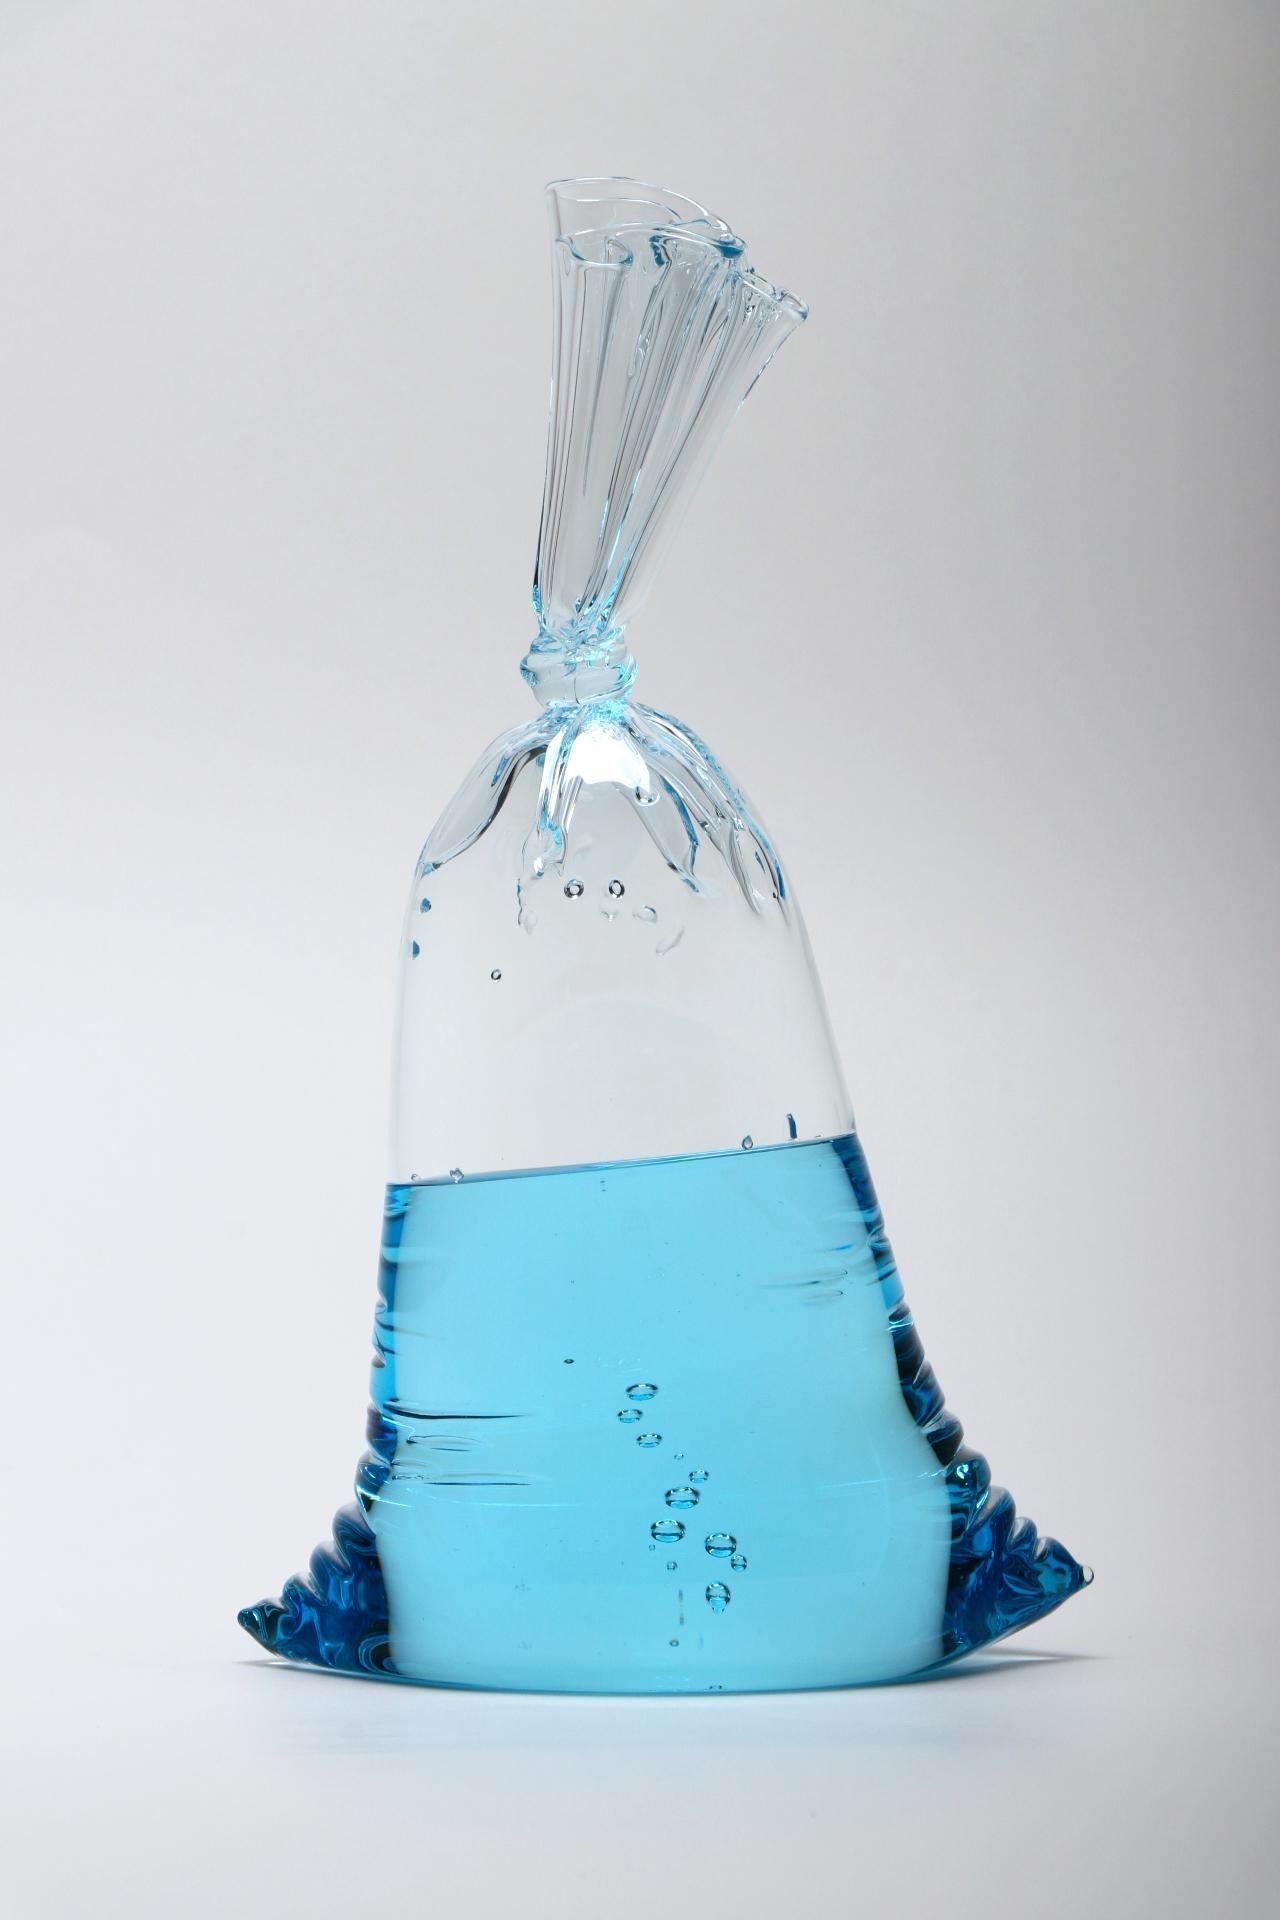 Modern Hyperreal blue glass water bag trio sculpture installation For Sale